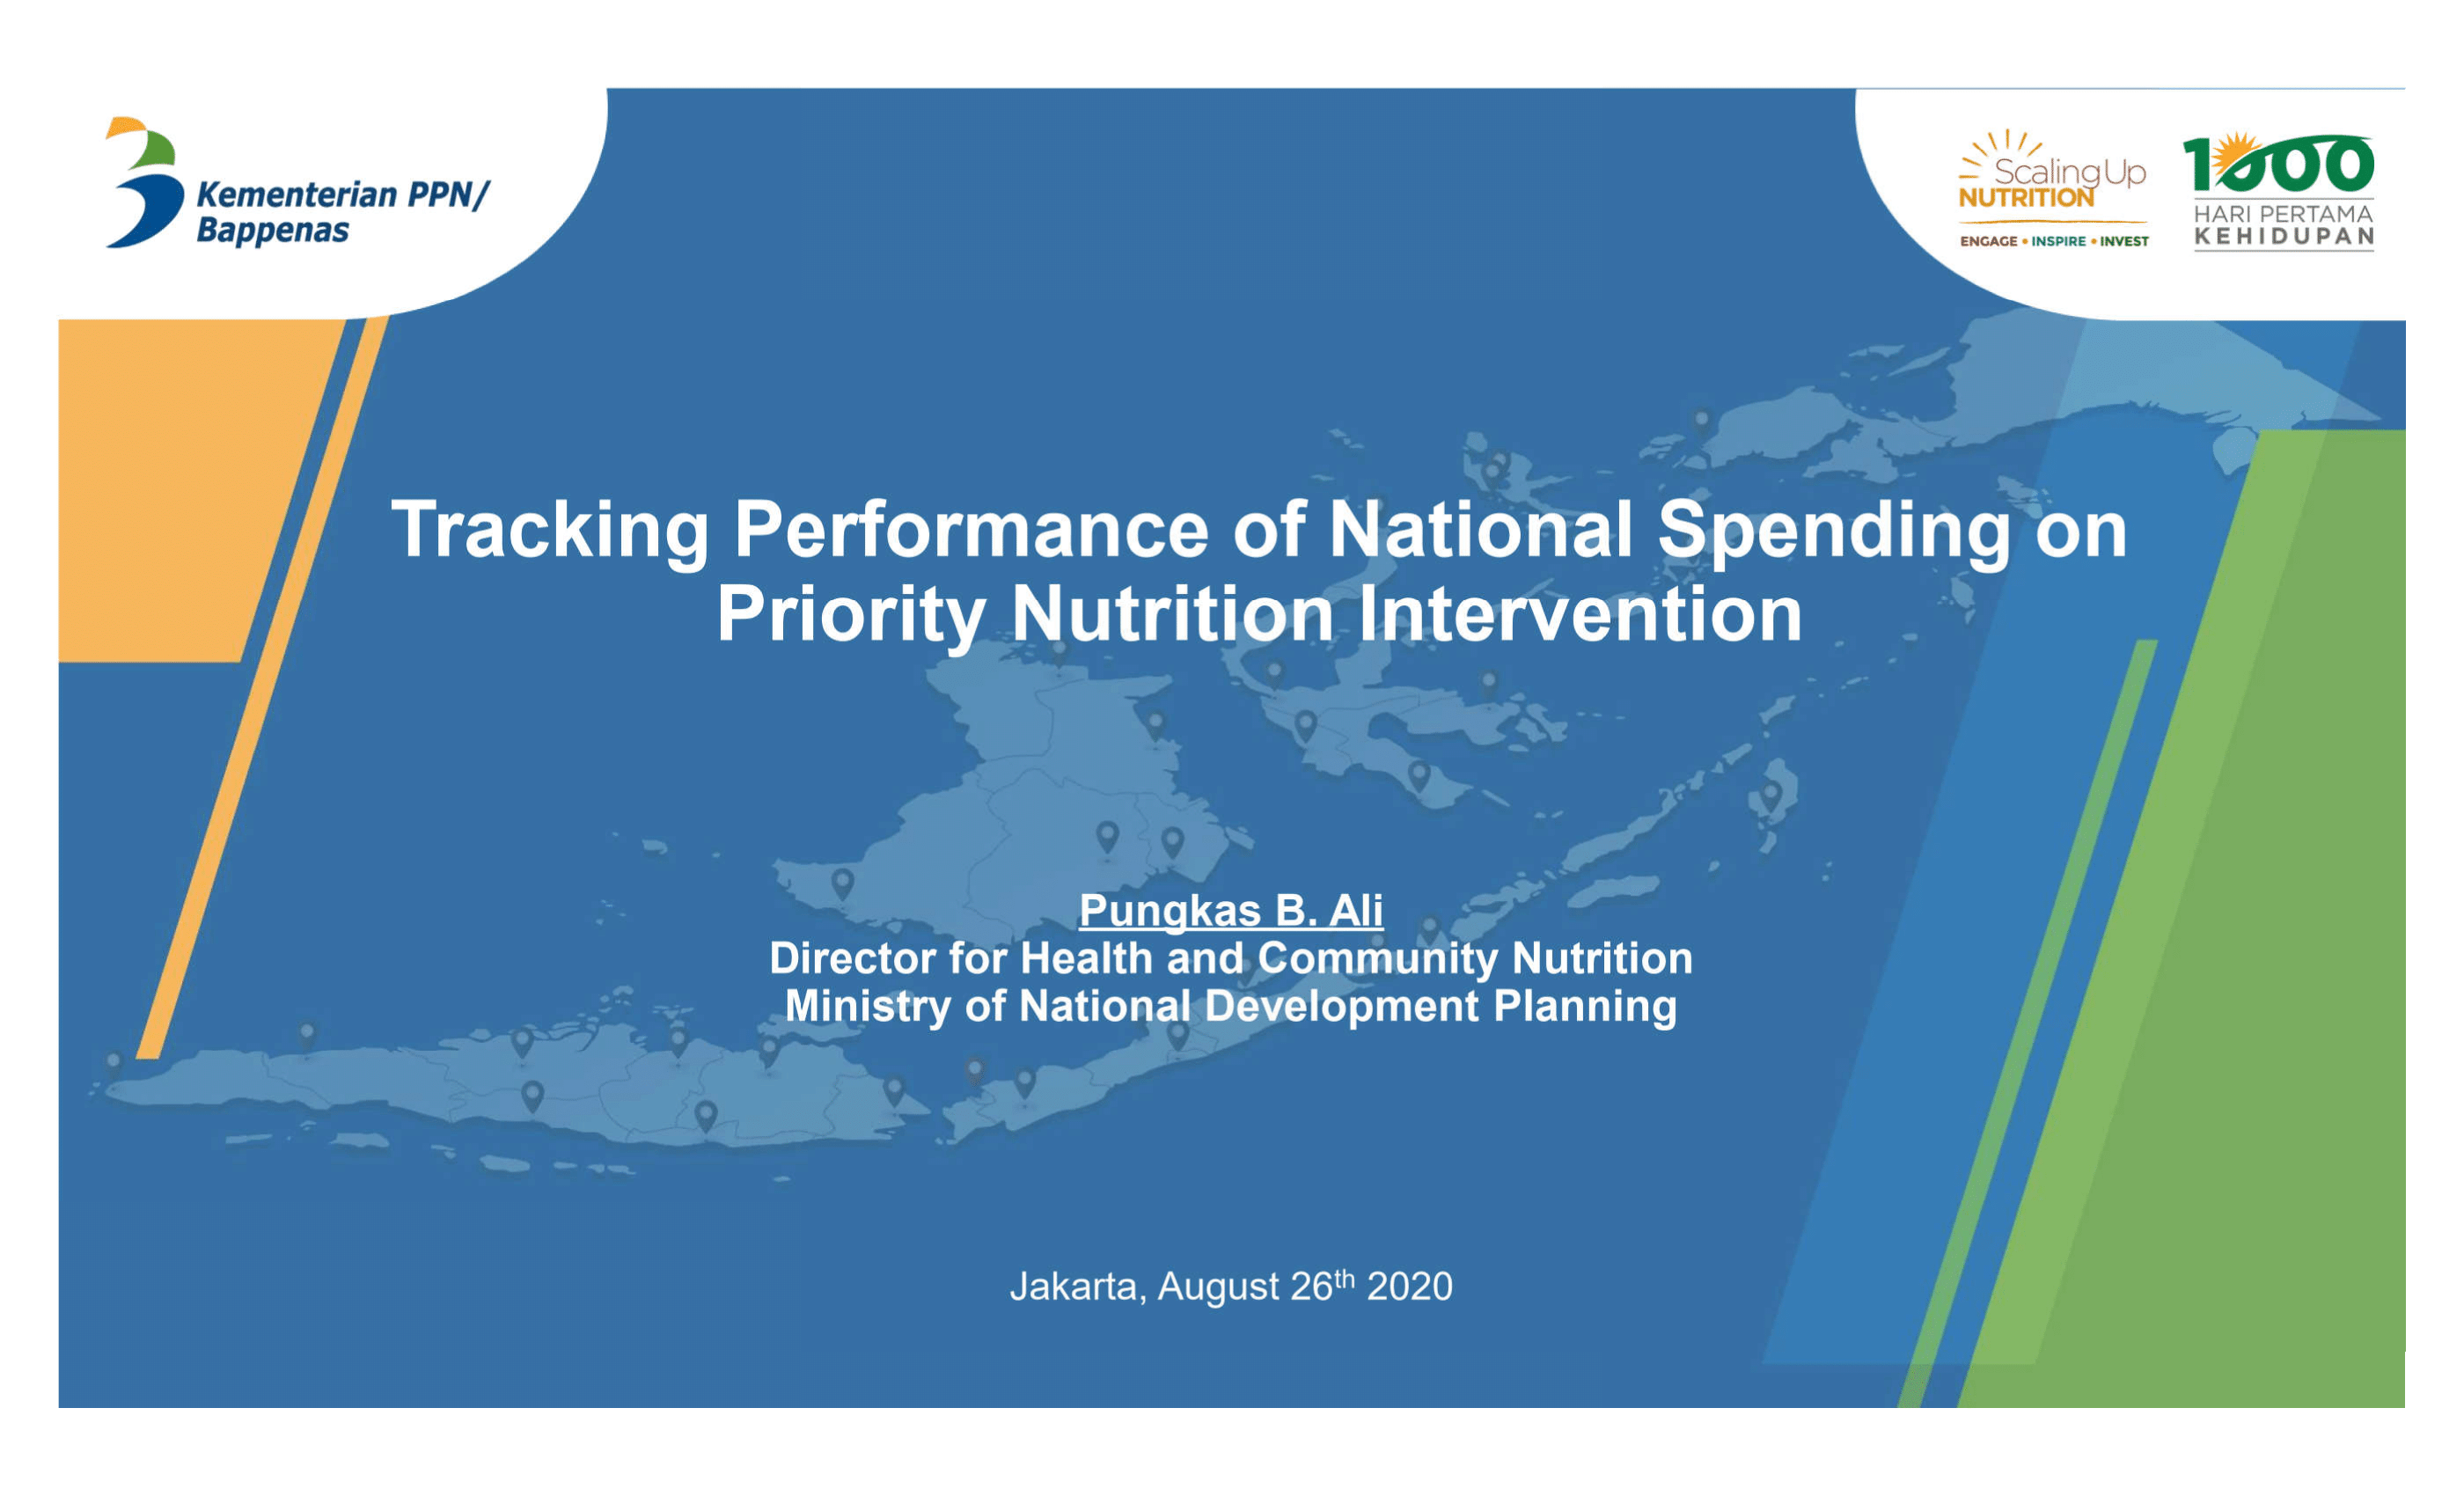 Tracking Performance of National Spending on Priority Nutrition